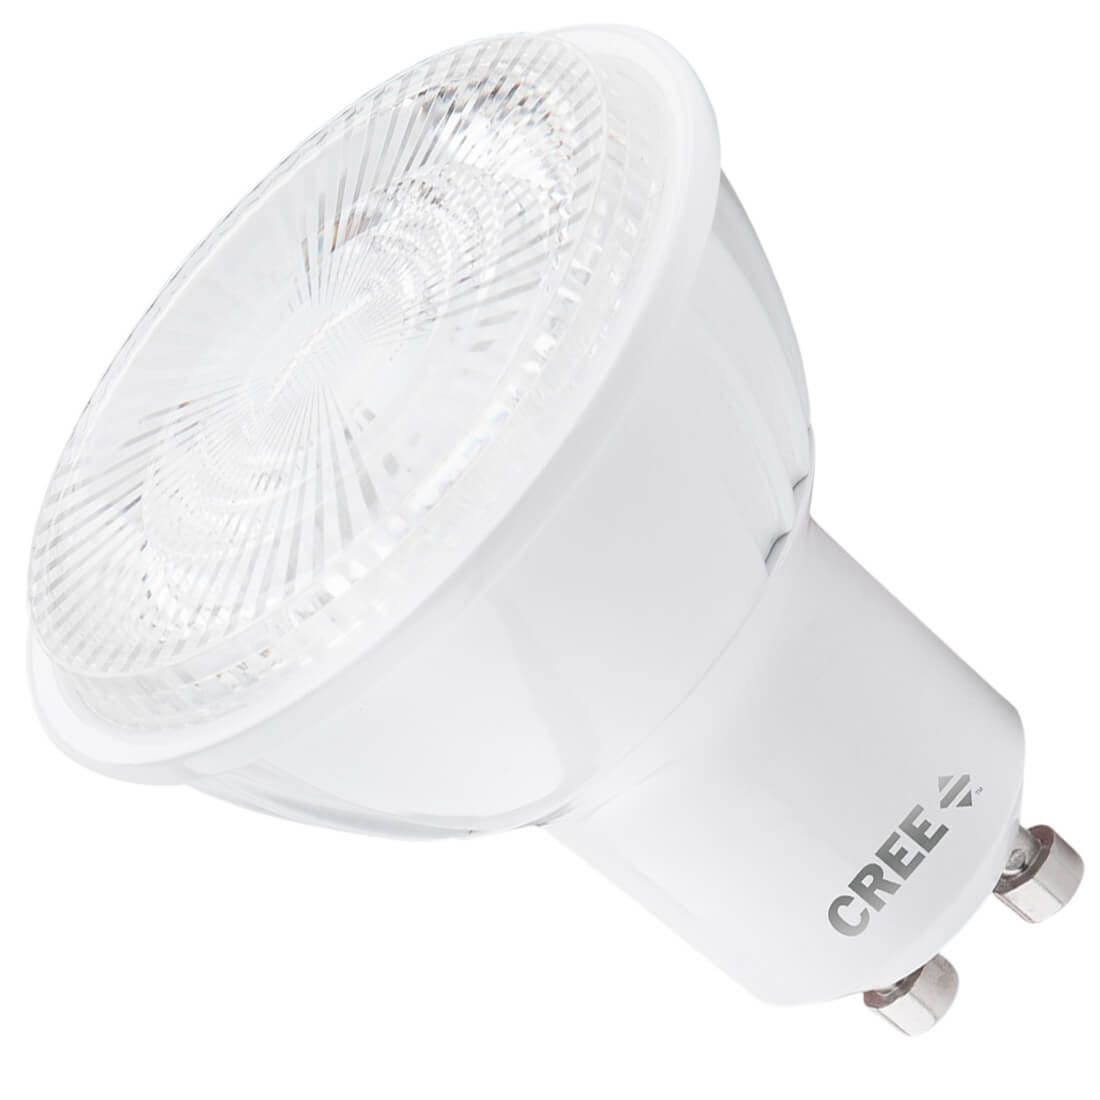 Cree Lighting Pro Series MR16 GU10 50W Equivalent LED Bulb, 35 Degree  Flood, 440 lumens, Dimmable, Bright White 3000K, 25,000 hour rated life,  90+ CRI